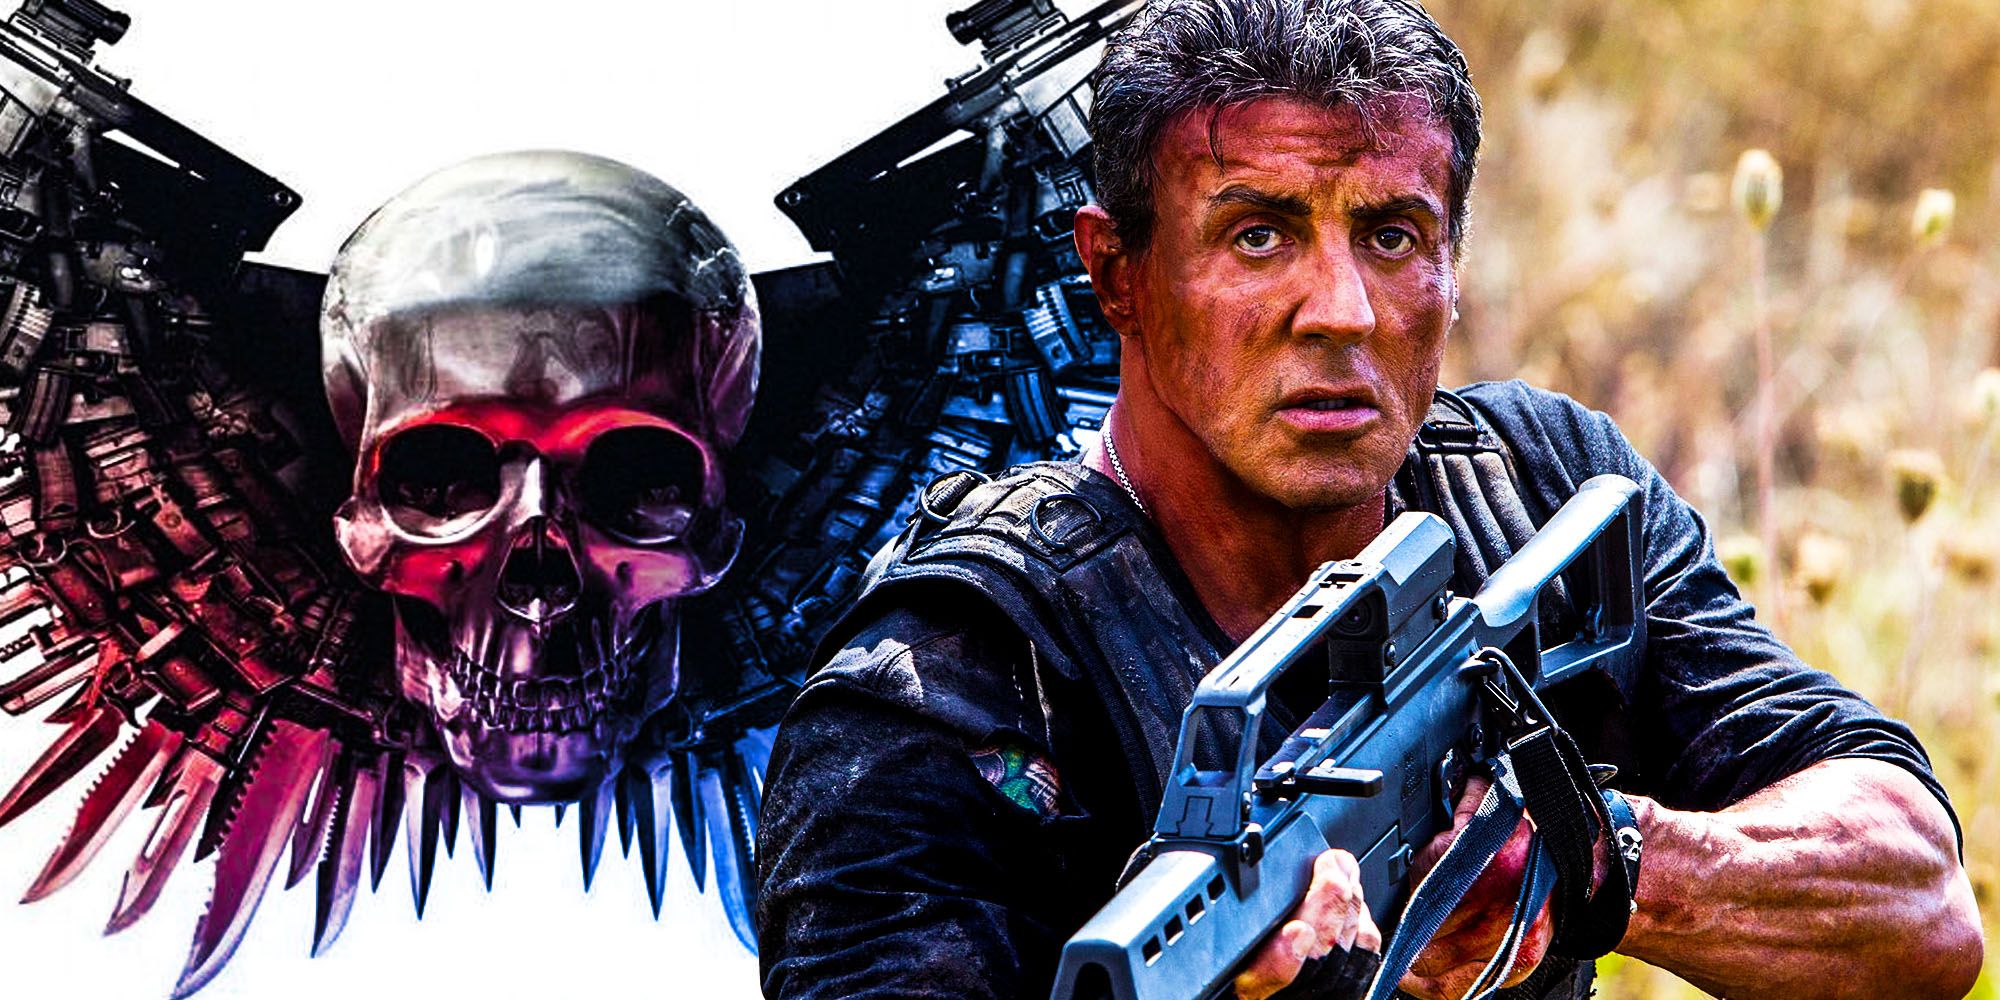 [Coming Soon] The Expendables Franchise